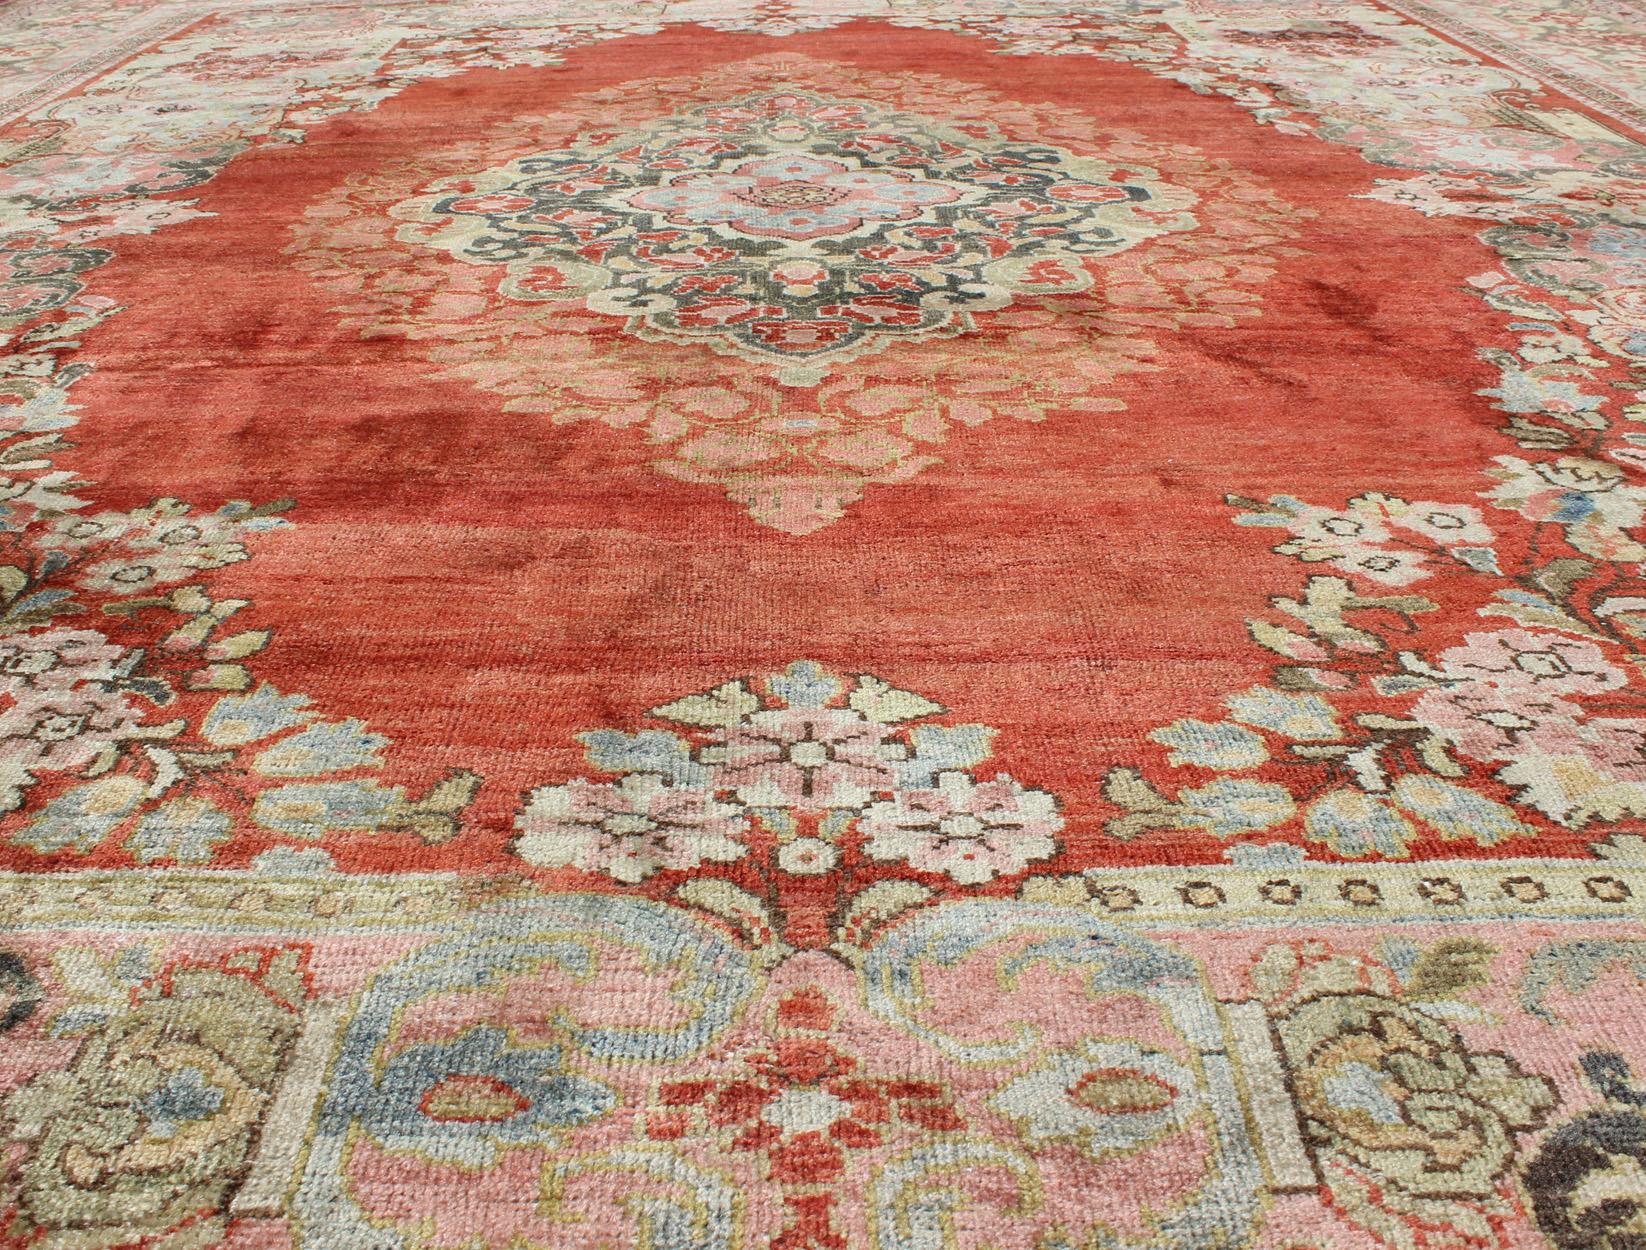  Persian Antique Mahal Rug with Beautiful Floral Design in Red, Pink, and Green  For Sale 4